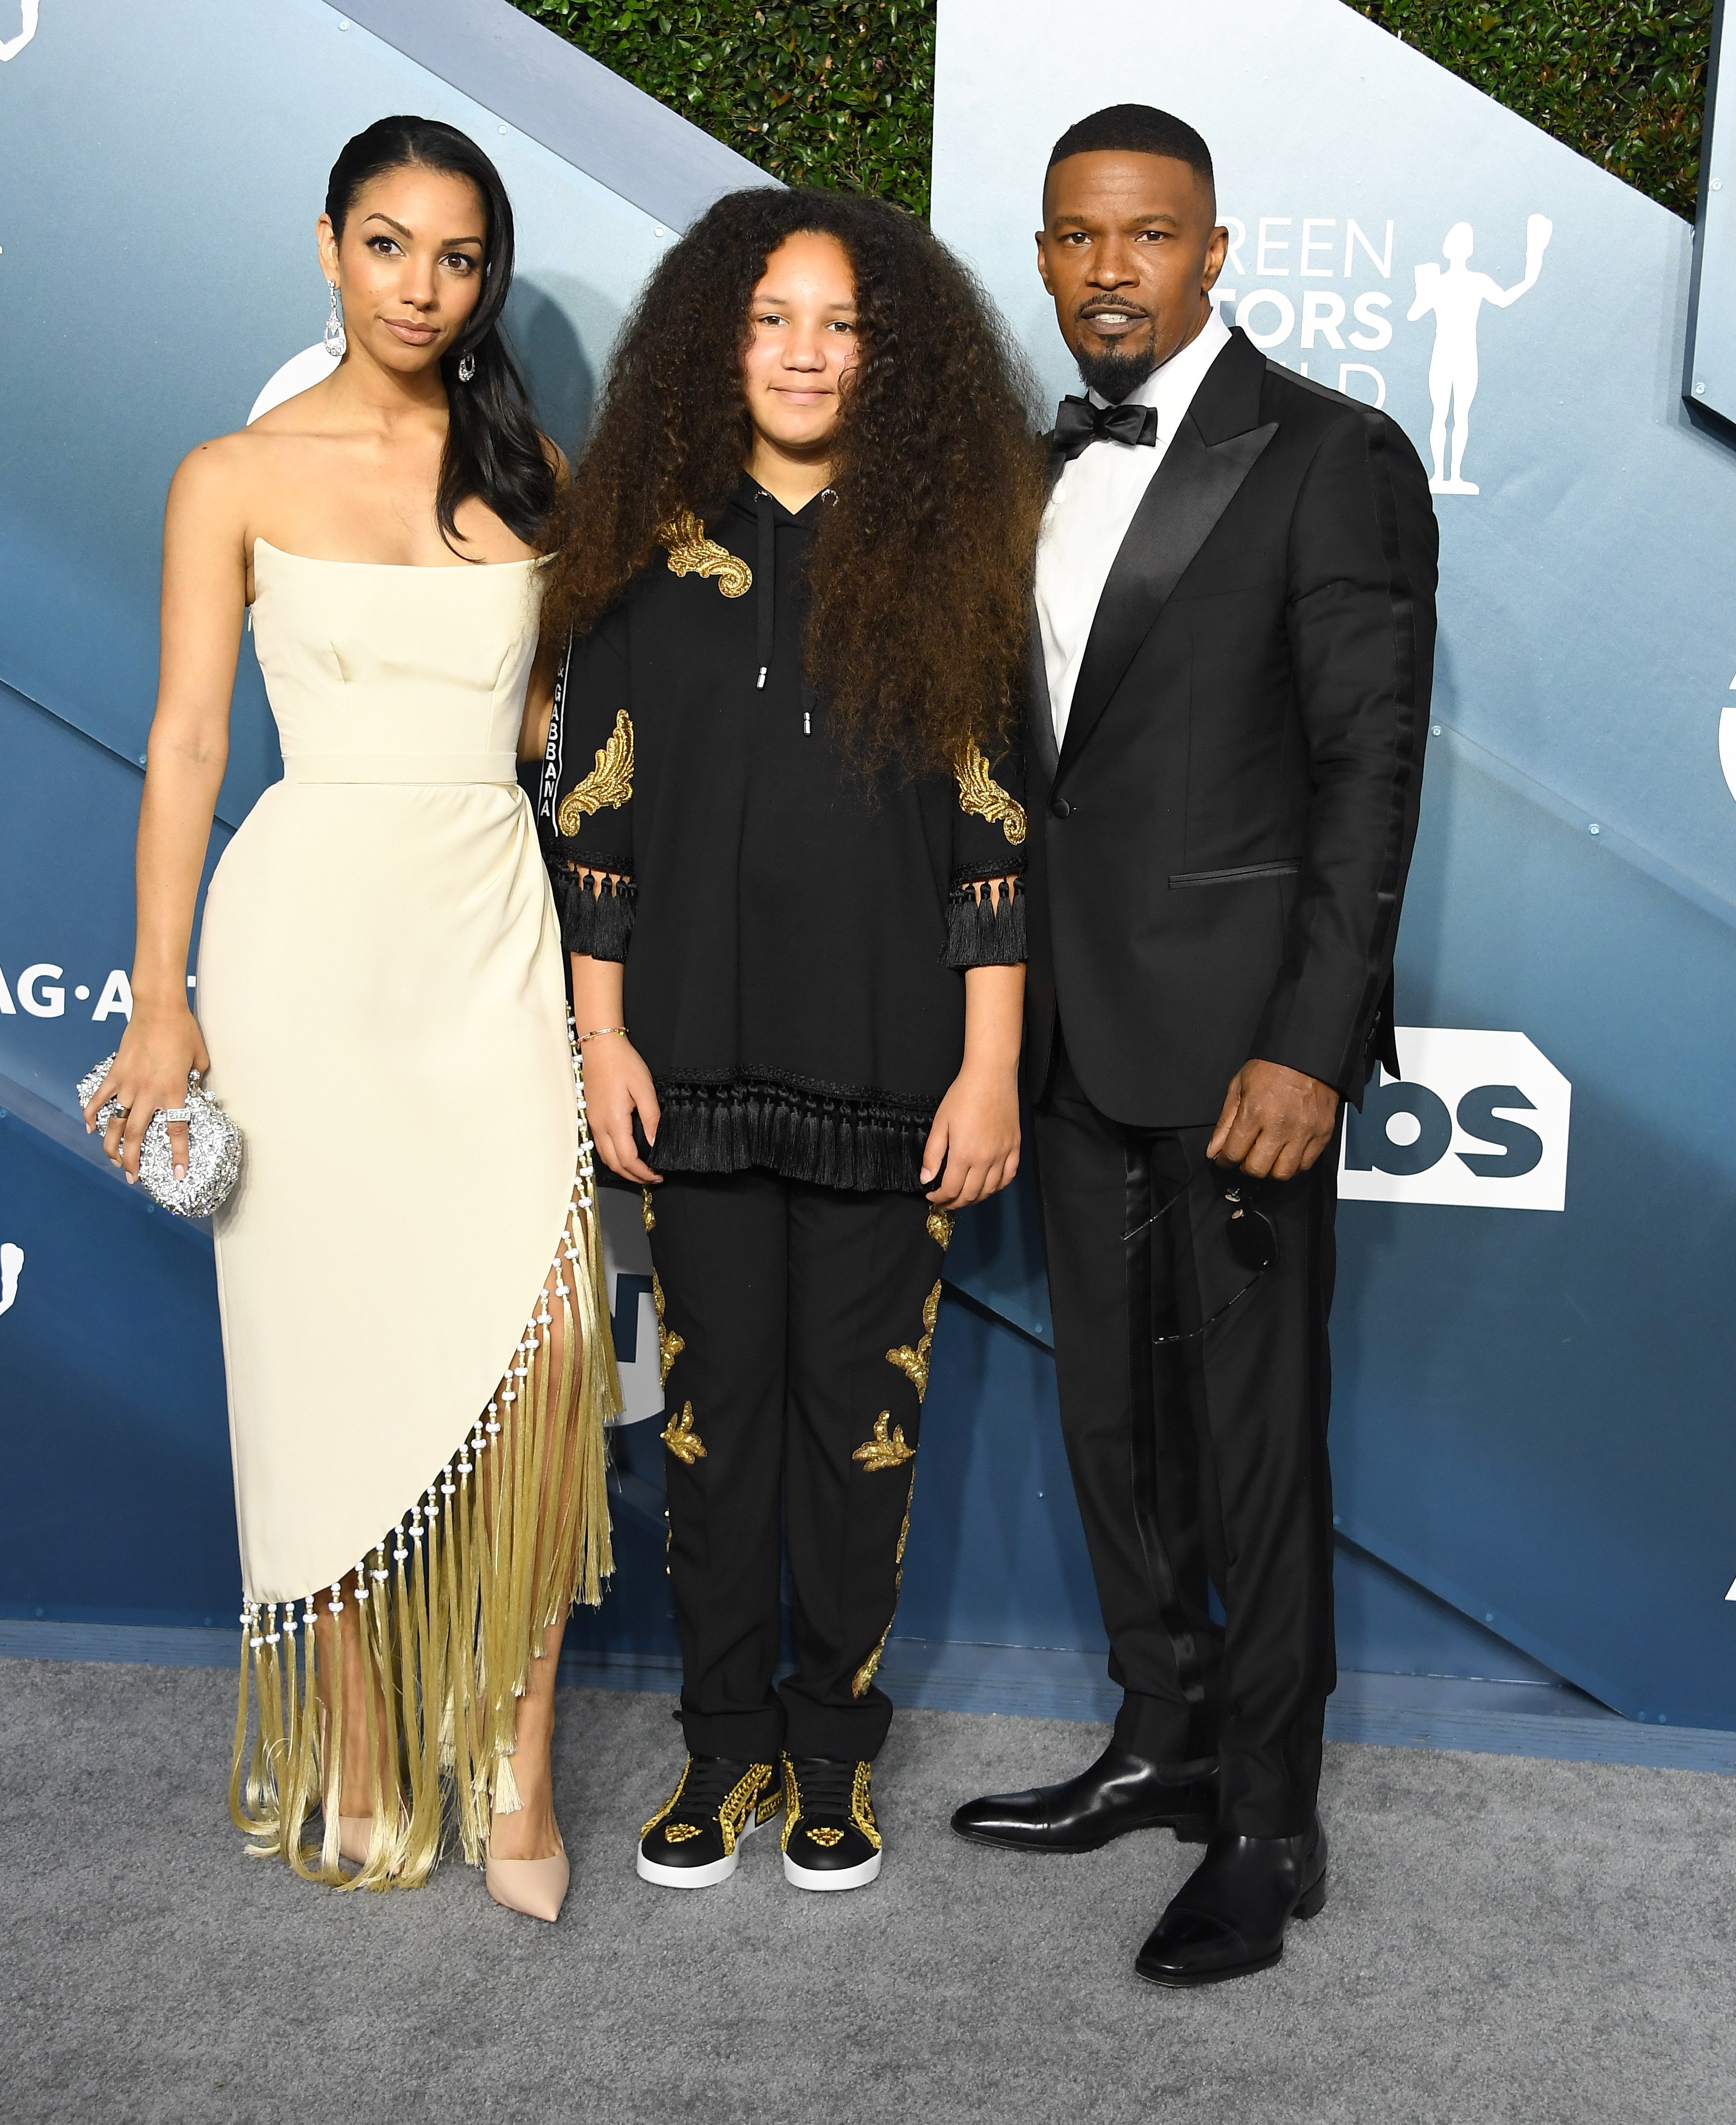 Corinne Foxx, Annalise Bishop and Jamie Foxx arrives at the 26th Annual Screen Actors Guild Awards at The Shrine Auditorium on January 19, 2020 in Los Angeles, California. | Photo: GettyImages